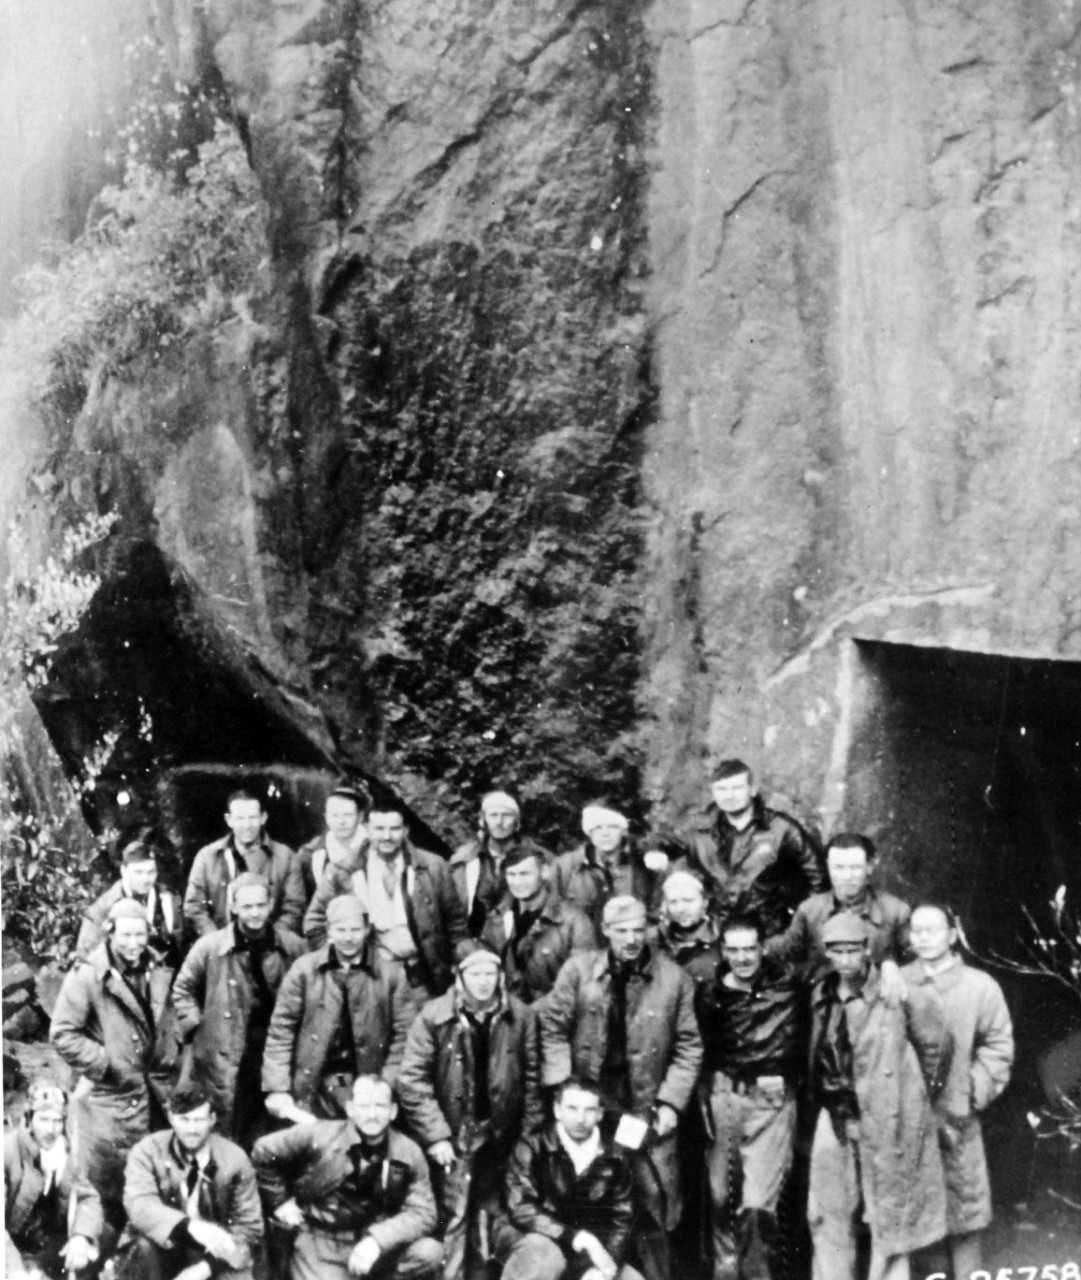 111-SC-25758AC:   Doolittle Raid on Japan, April 18, 1942.  Major General James Doolittle’s Tokyo Raiders are grouped outside the shelter carved from the mountainside.  They lived there for 10 days after assembling from their Chinese Mountain retreats.      U.S. Army photograph, now in the collections of the National Archives.  (2017/05/02).